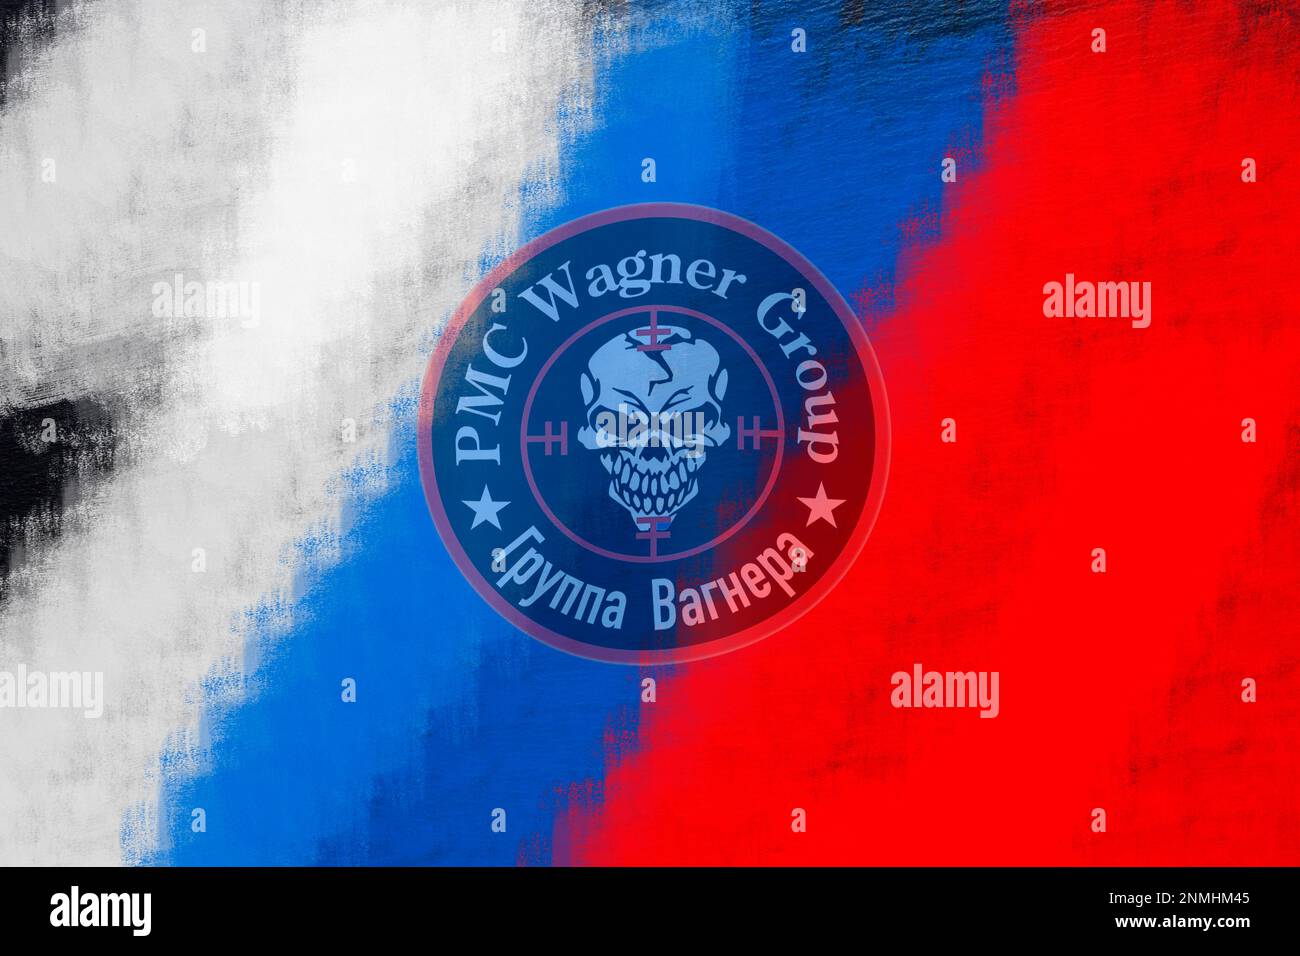 Logo of the Russian private mercenary group Wagner), in the background the Russian national colours white, blue and red Stock Photo